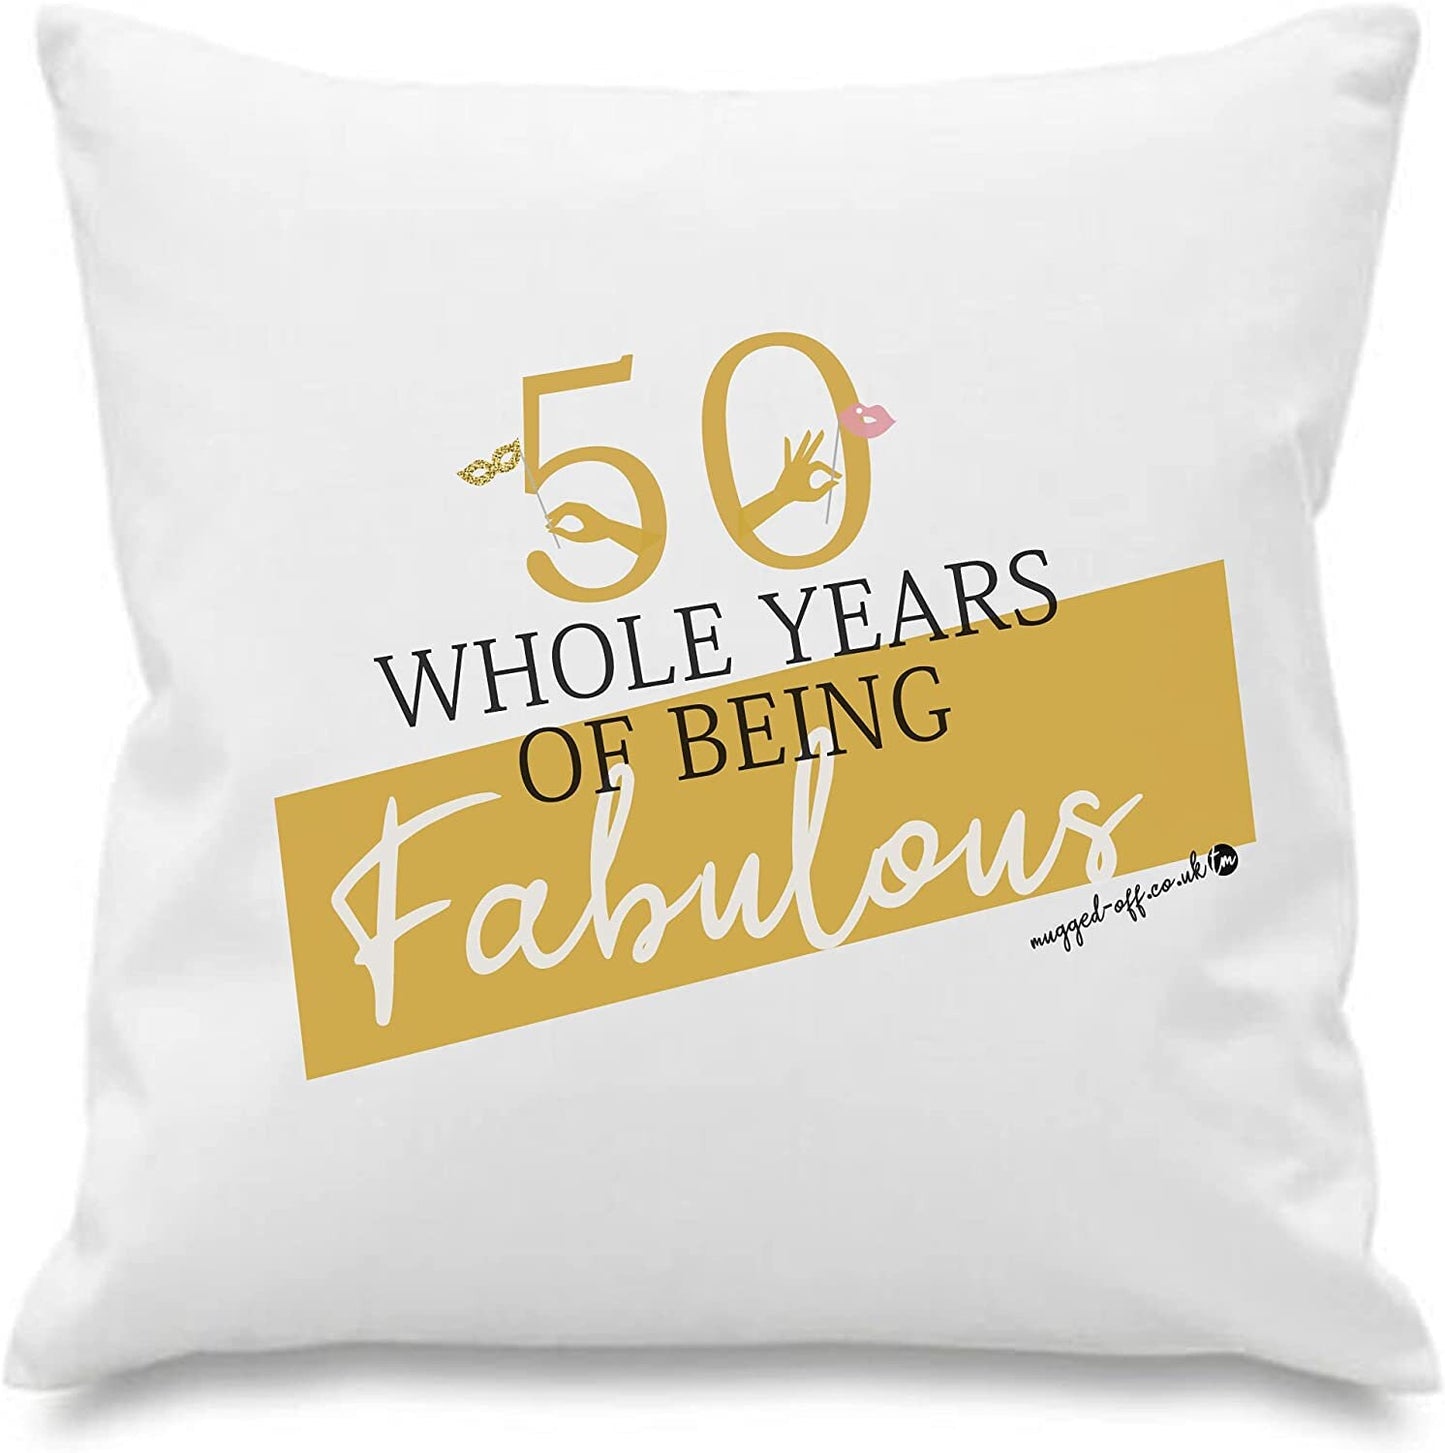 50th Birthday Gift For Him Or Her Cushion Cover Ideal Birthday Present For 50 Year Old